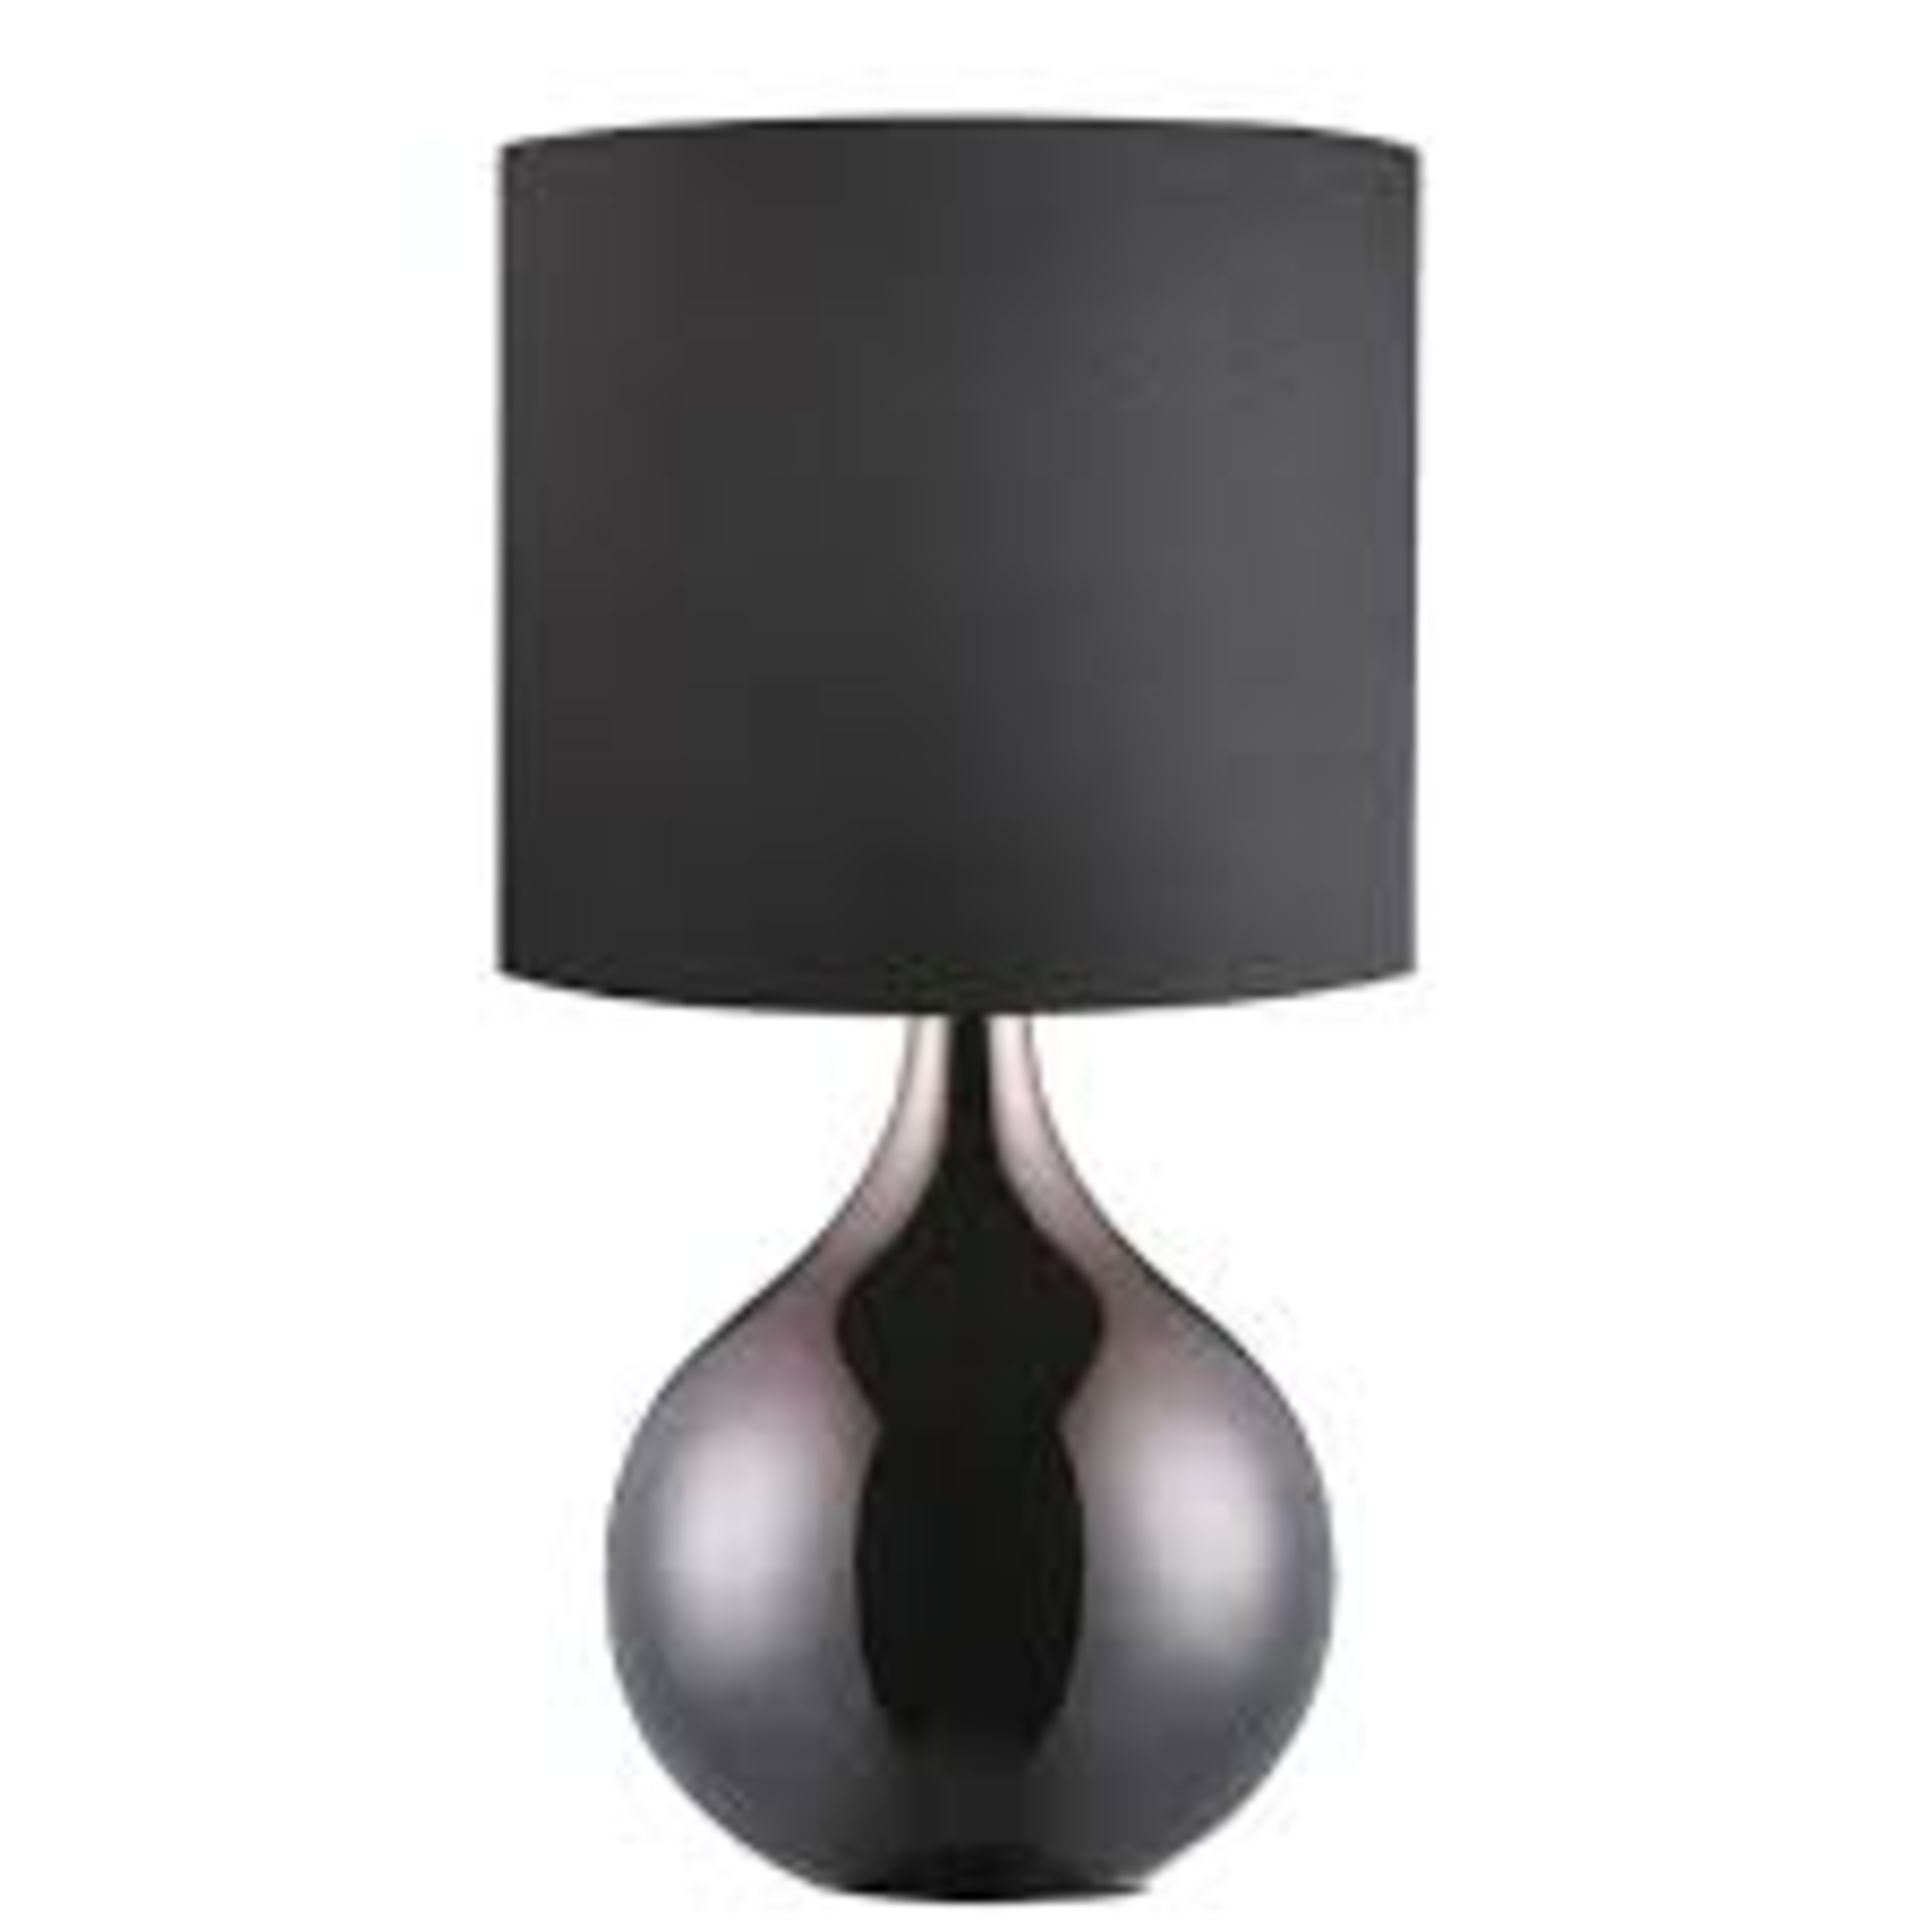 1 x Searchlight Table Lamp in black with a glass base - Ref: 3520BK - New and Boxed - RRP: £80 - Image 3 of 4